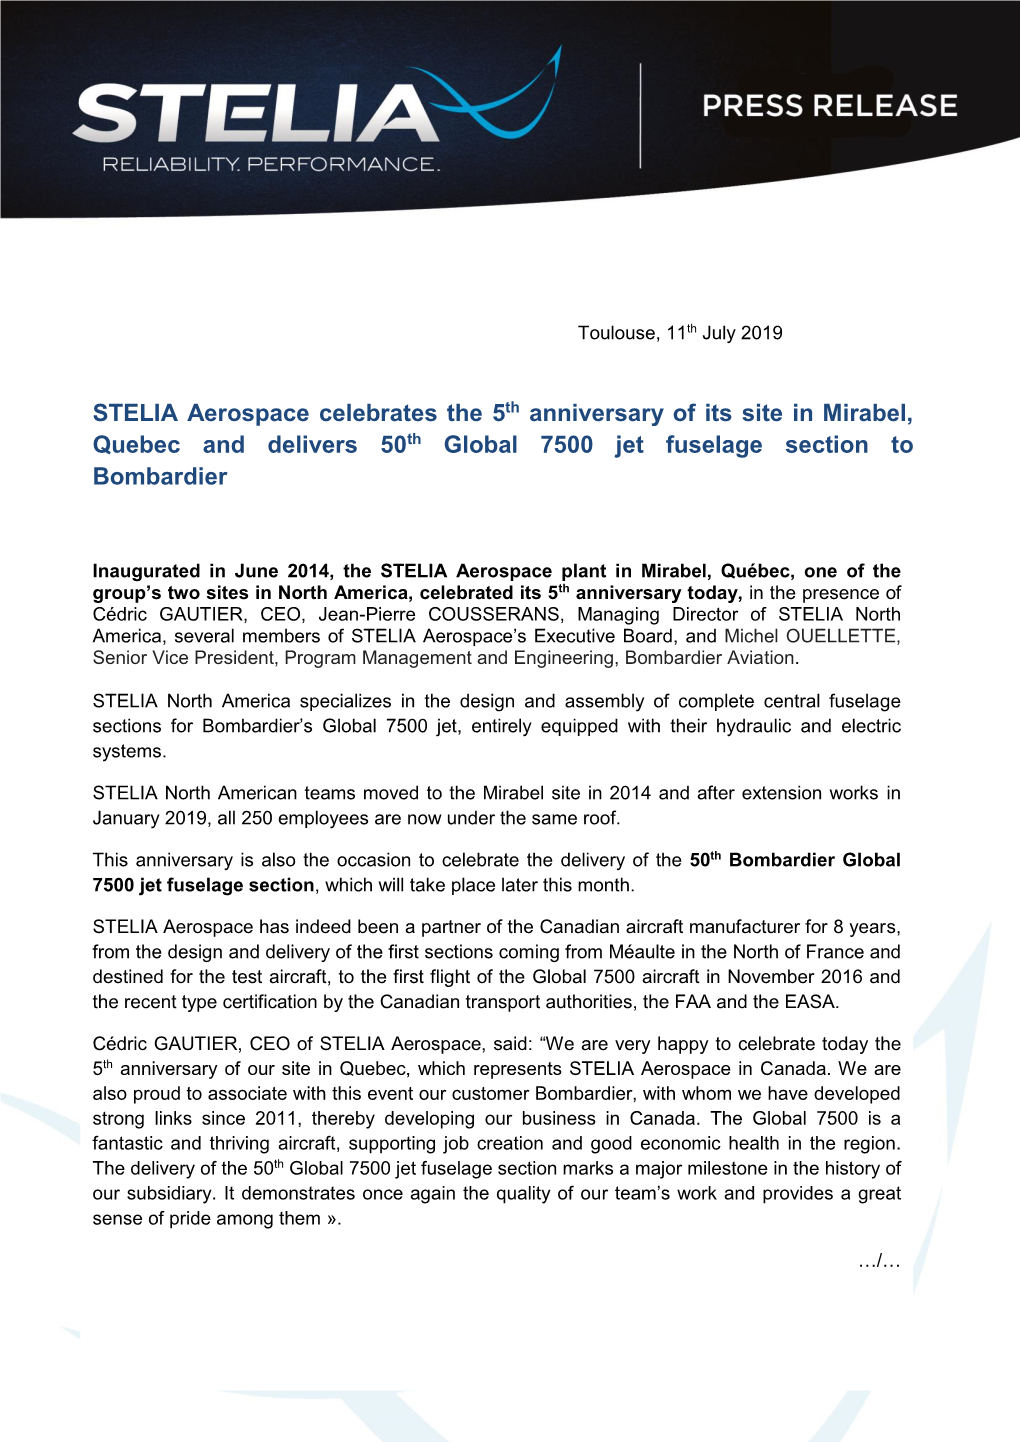 STELIA Aerospace Celebrates the 5Th Anniversary of Its Site in Mirabel, Quebec and Delivers 50Th Global 7500 Jet Fuselage Section to Bombardier